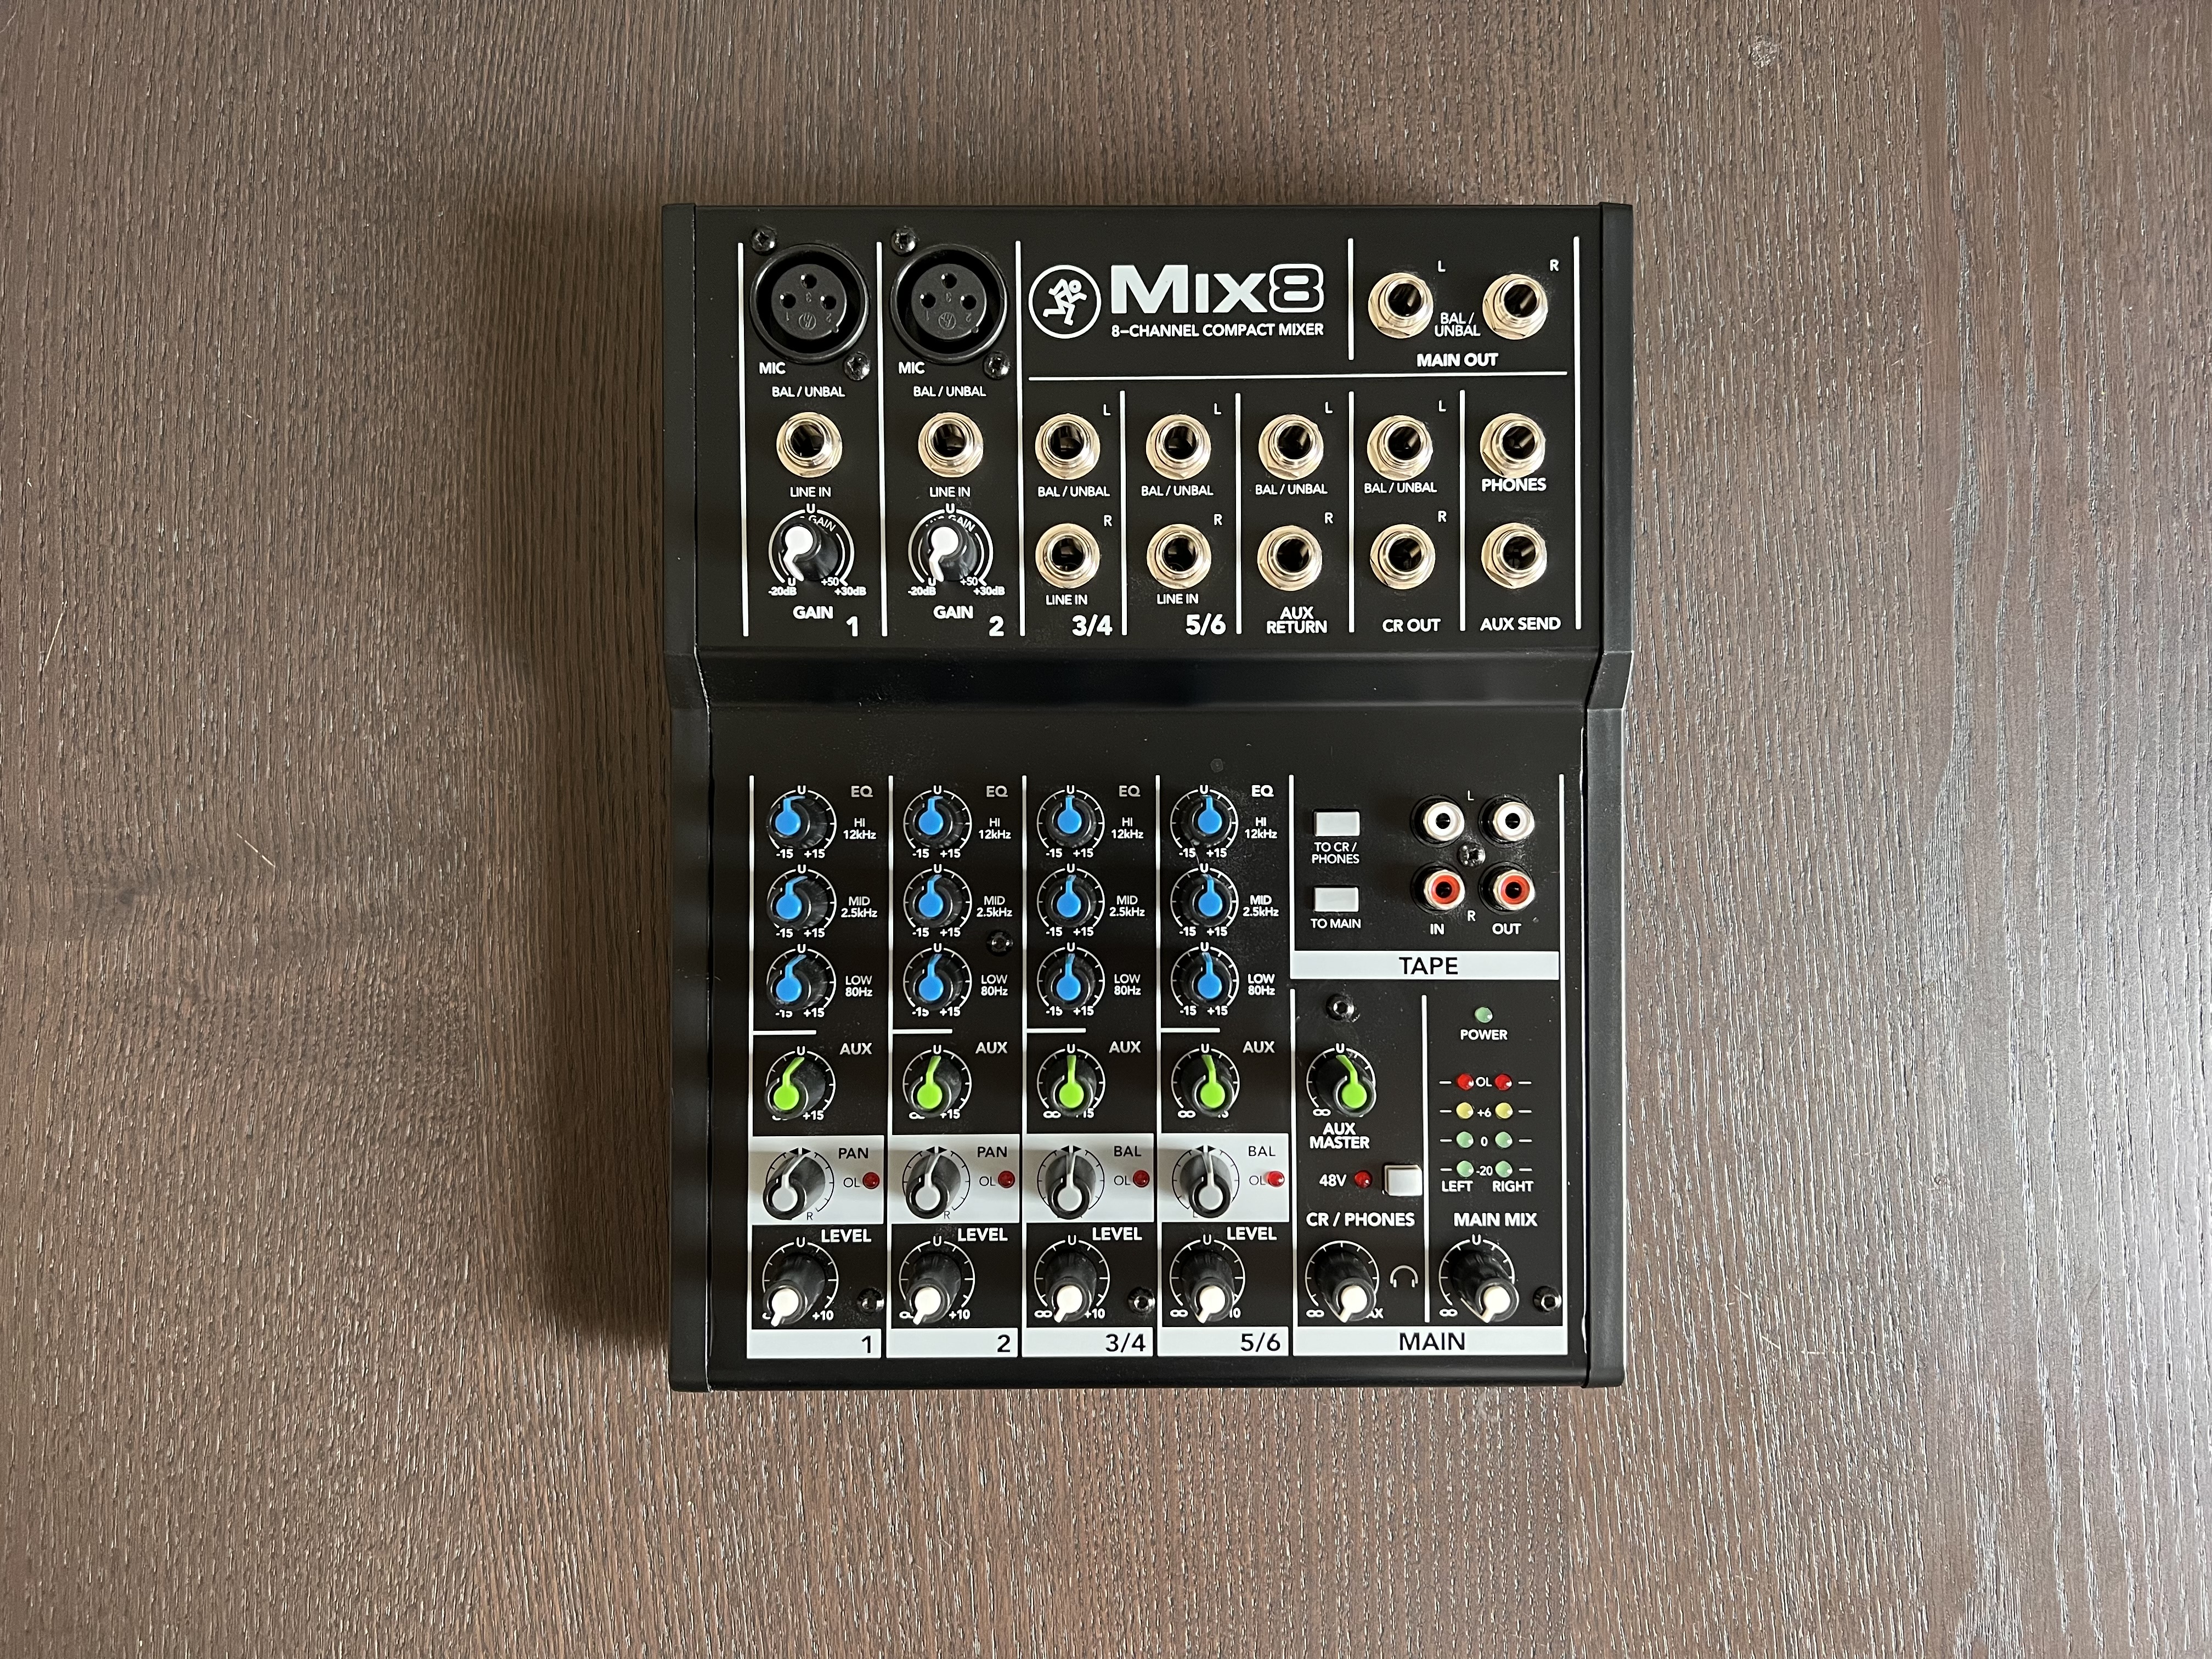 Mackie Compact Mix8 8-Channel Mixer